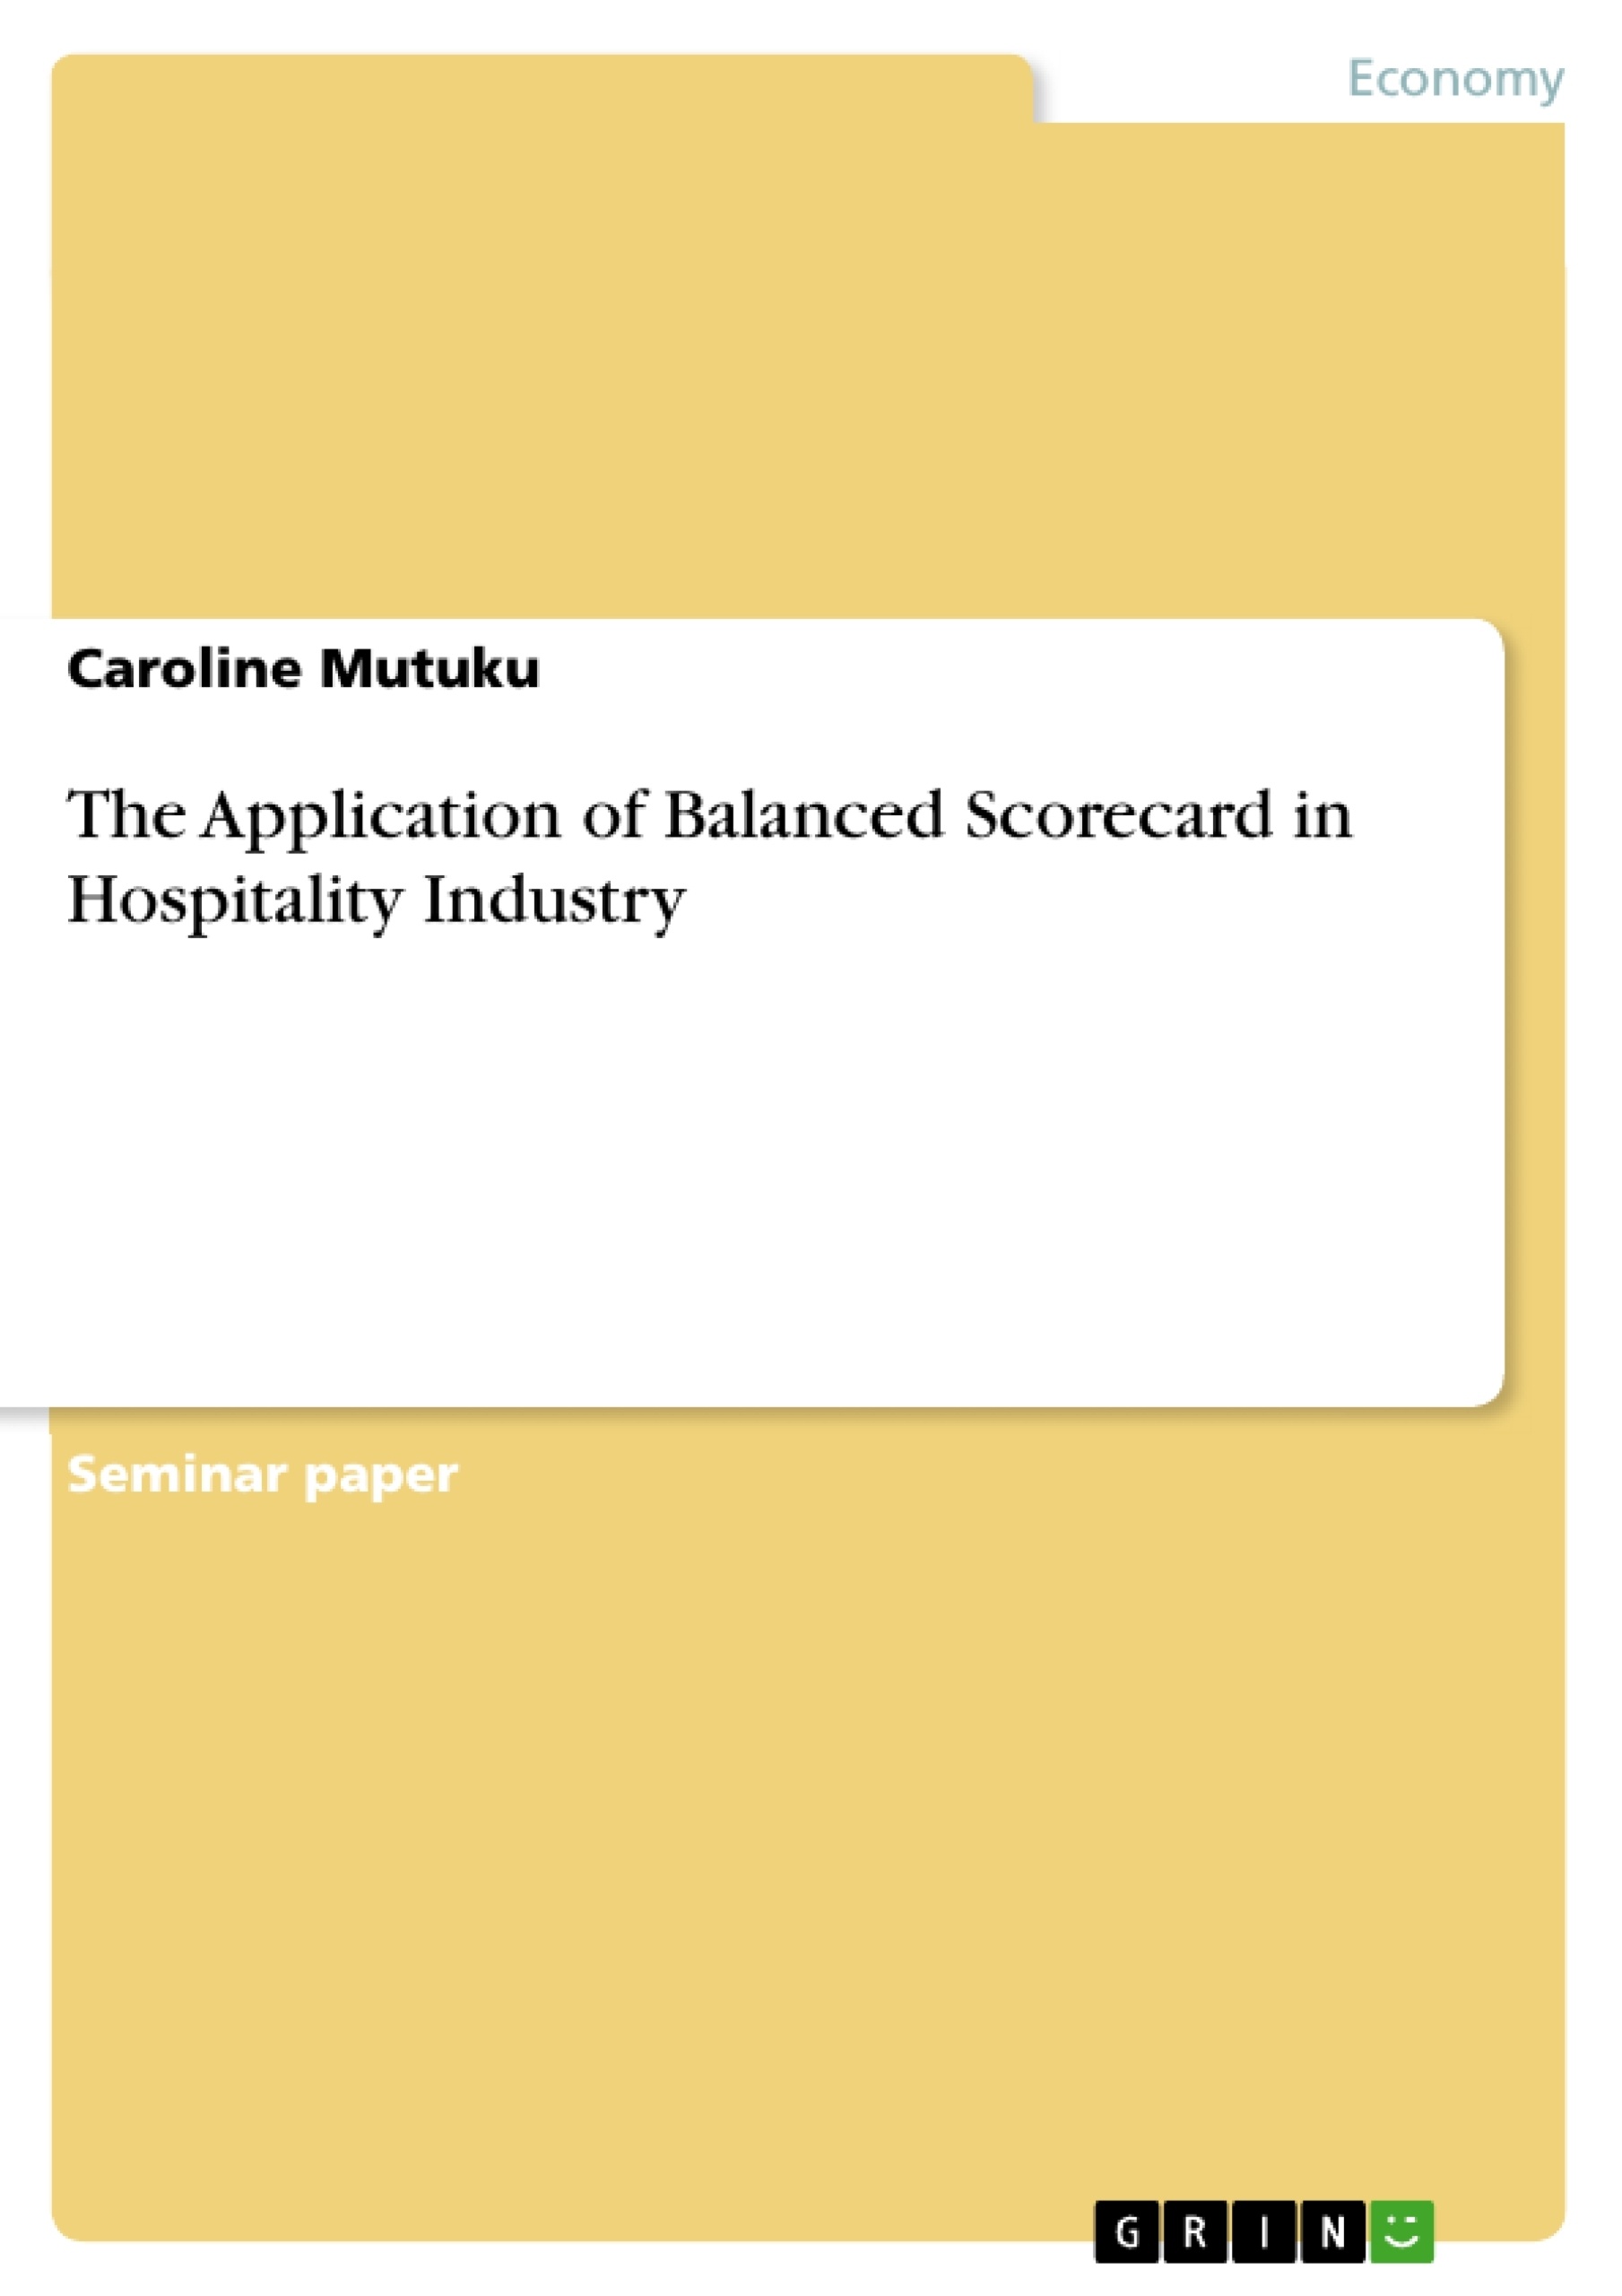 Title: The Application of Balanced Scorecard in Hospitality Industry